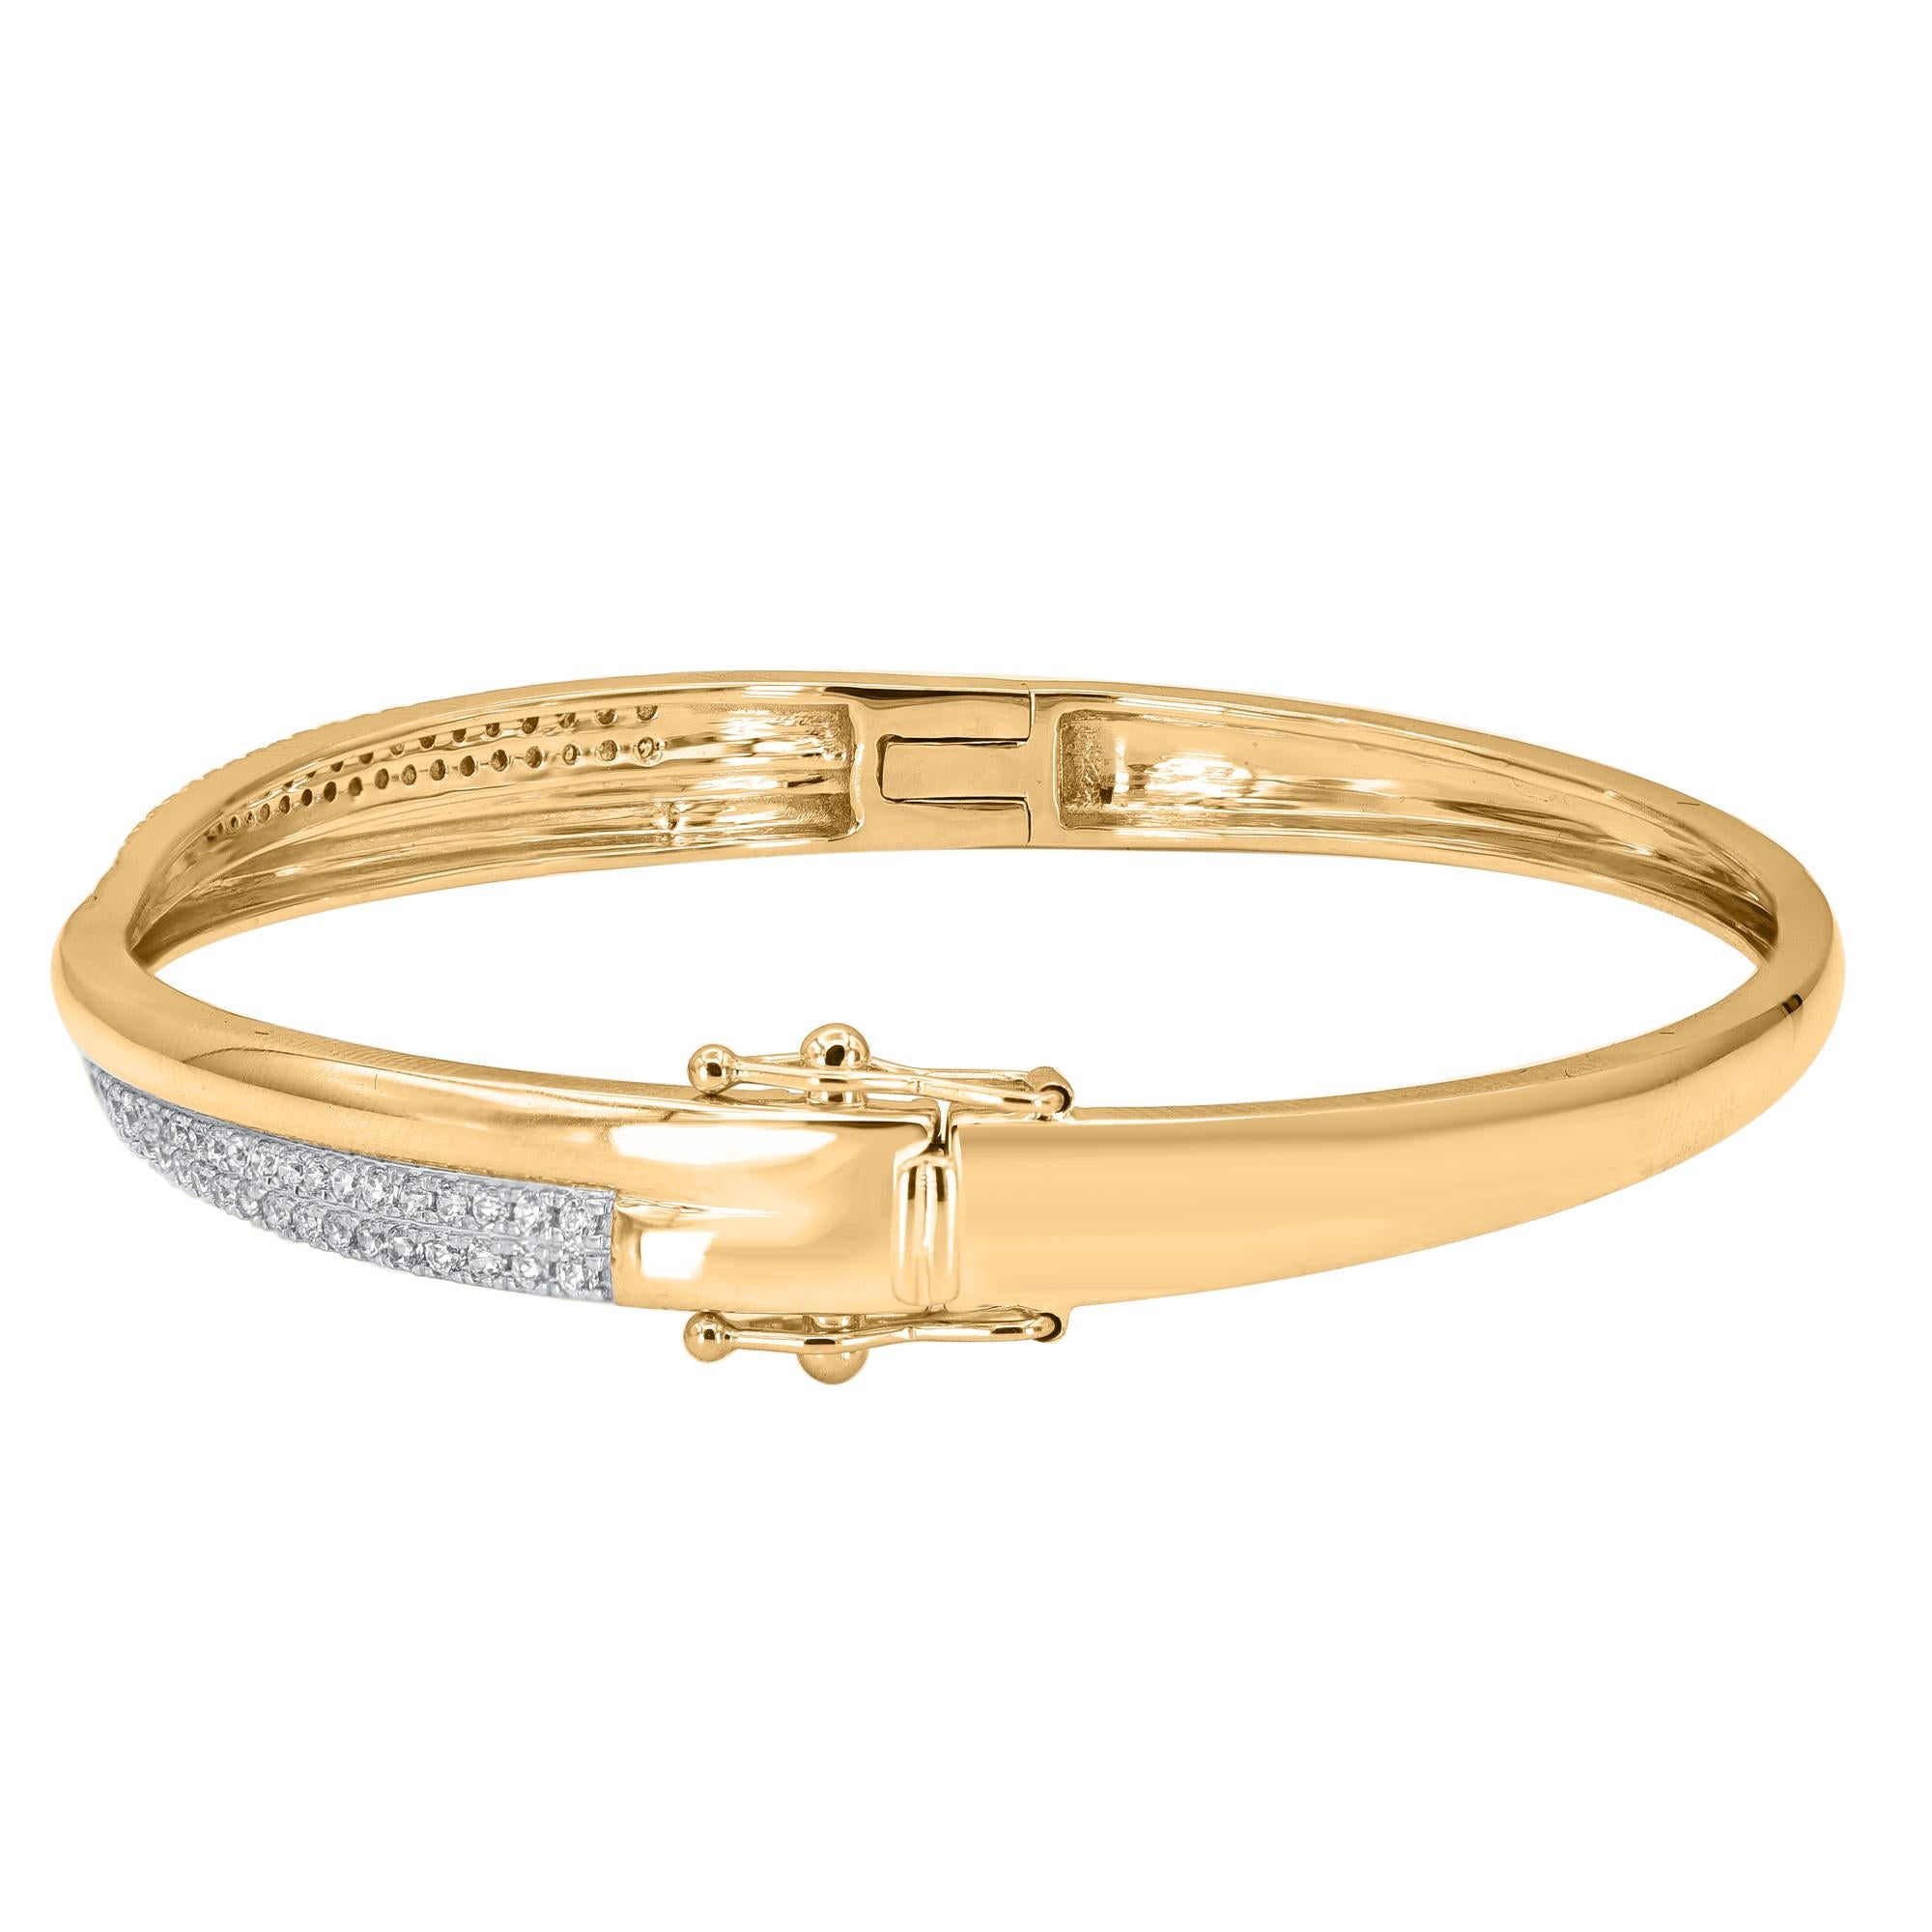 Classic and sophisticated, this diamond bangle bracelet pairs well with any attire.
This Shimmering bangle bracelet features 78 natural single cut & brilliant cut diamonds in prong setting and crafted in 18 kt yellow gold. Diamonds are graded H-I